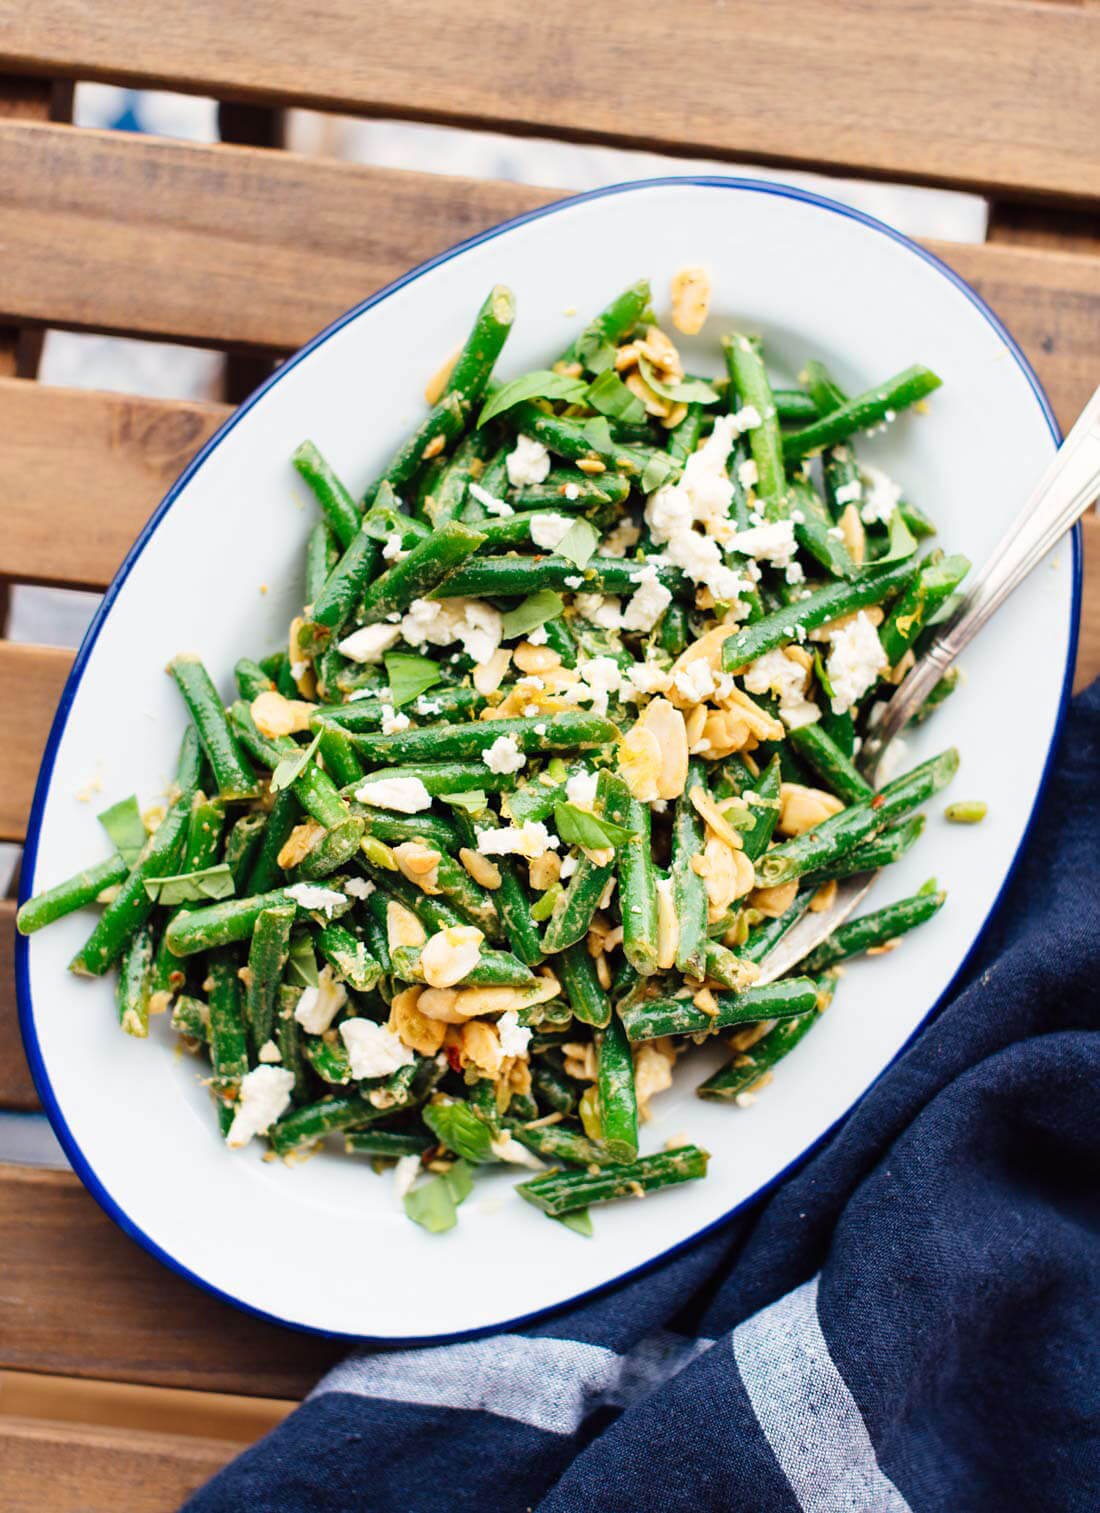 This green bean salad recipe is epic!  Learn the best way to cook green beans and get the recipe at cookieandkate.com